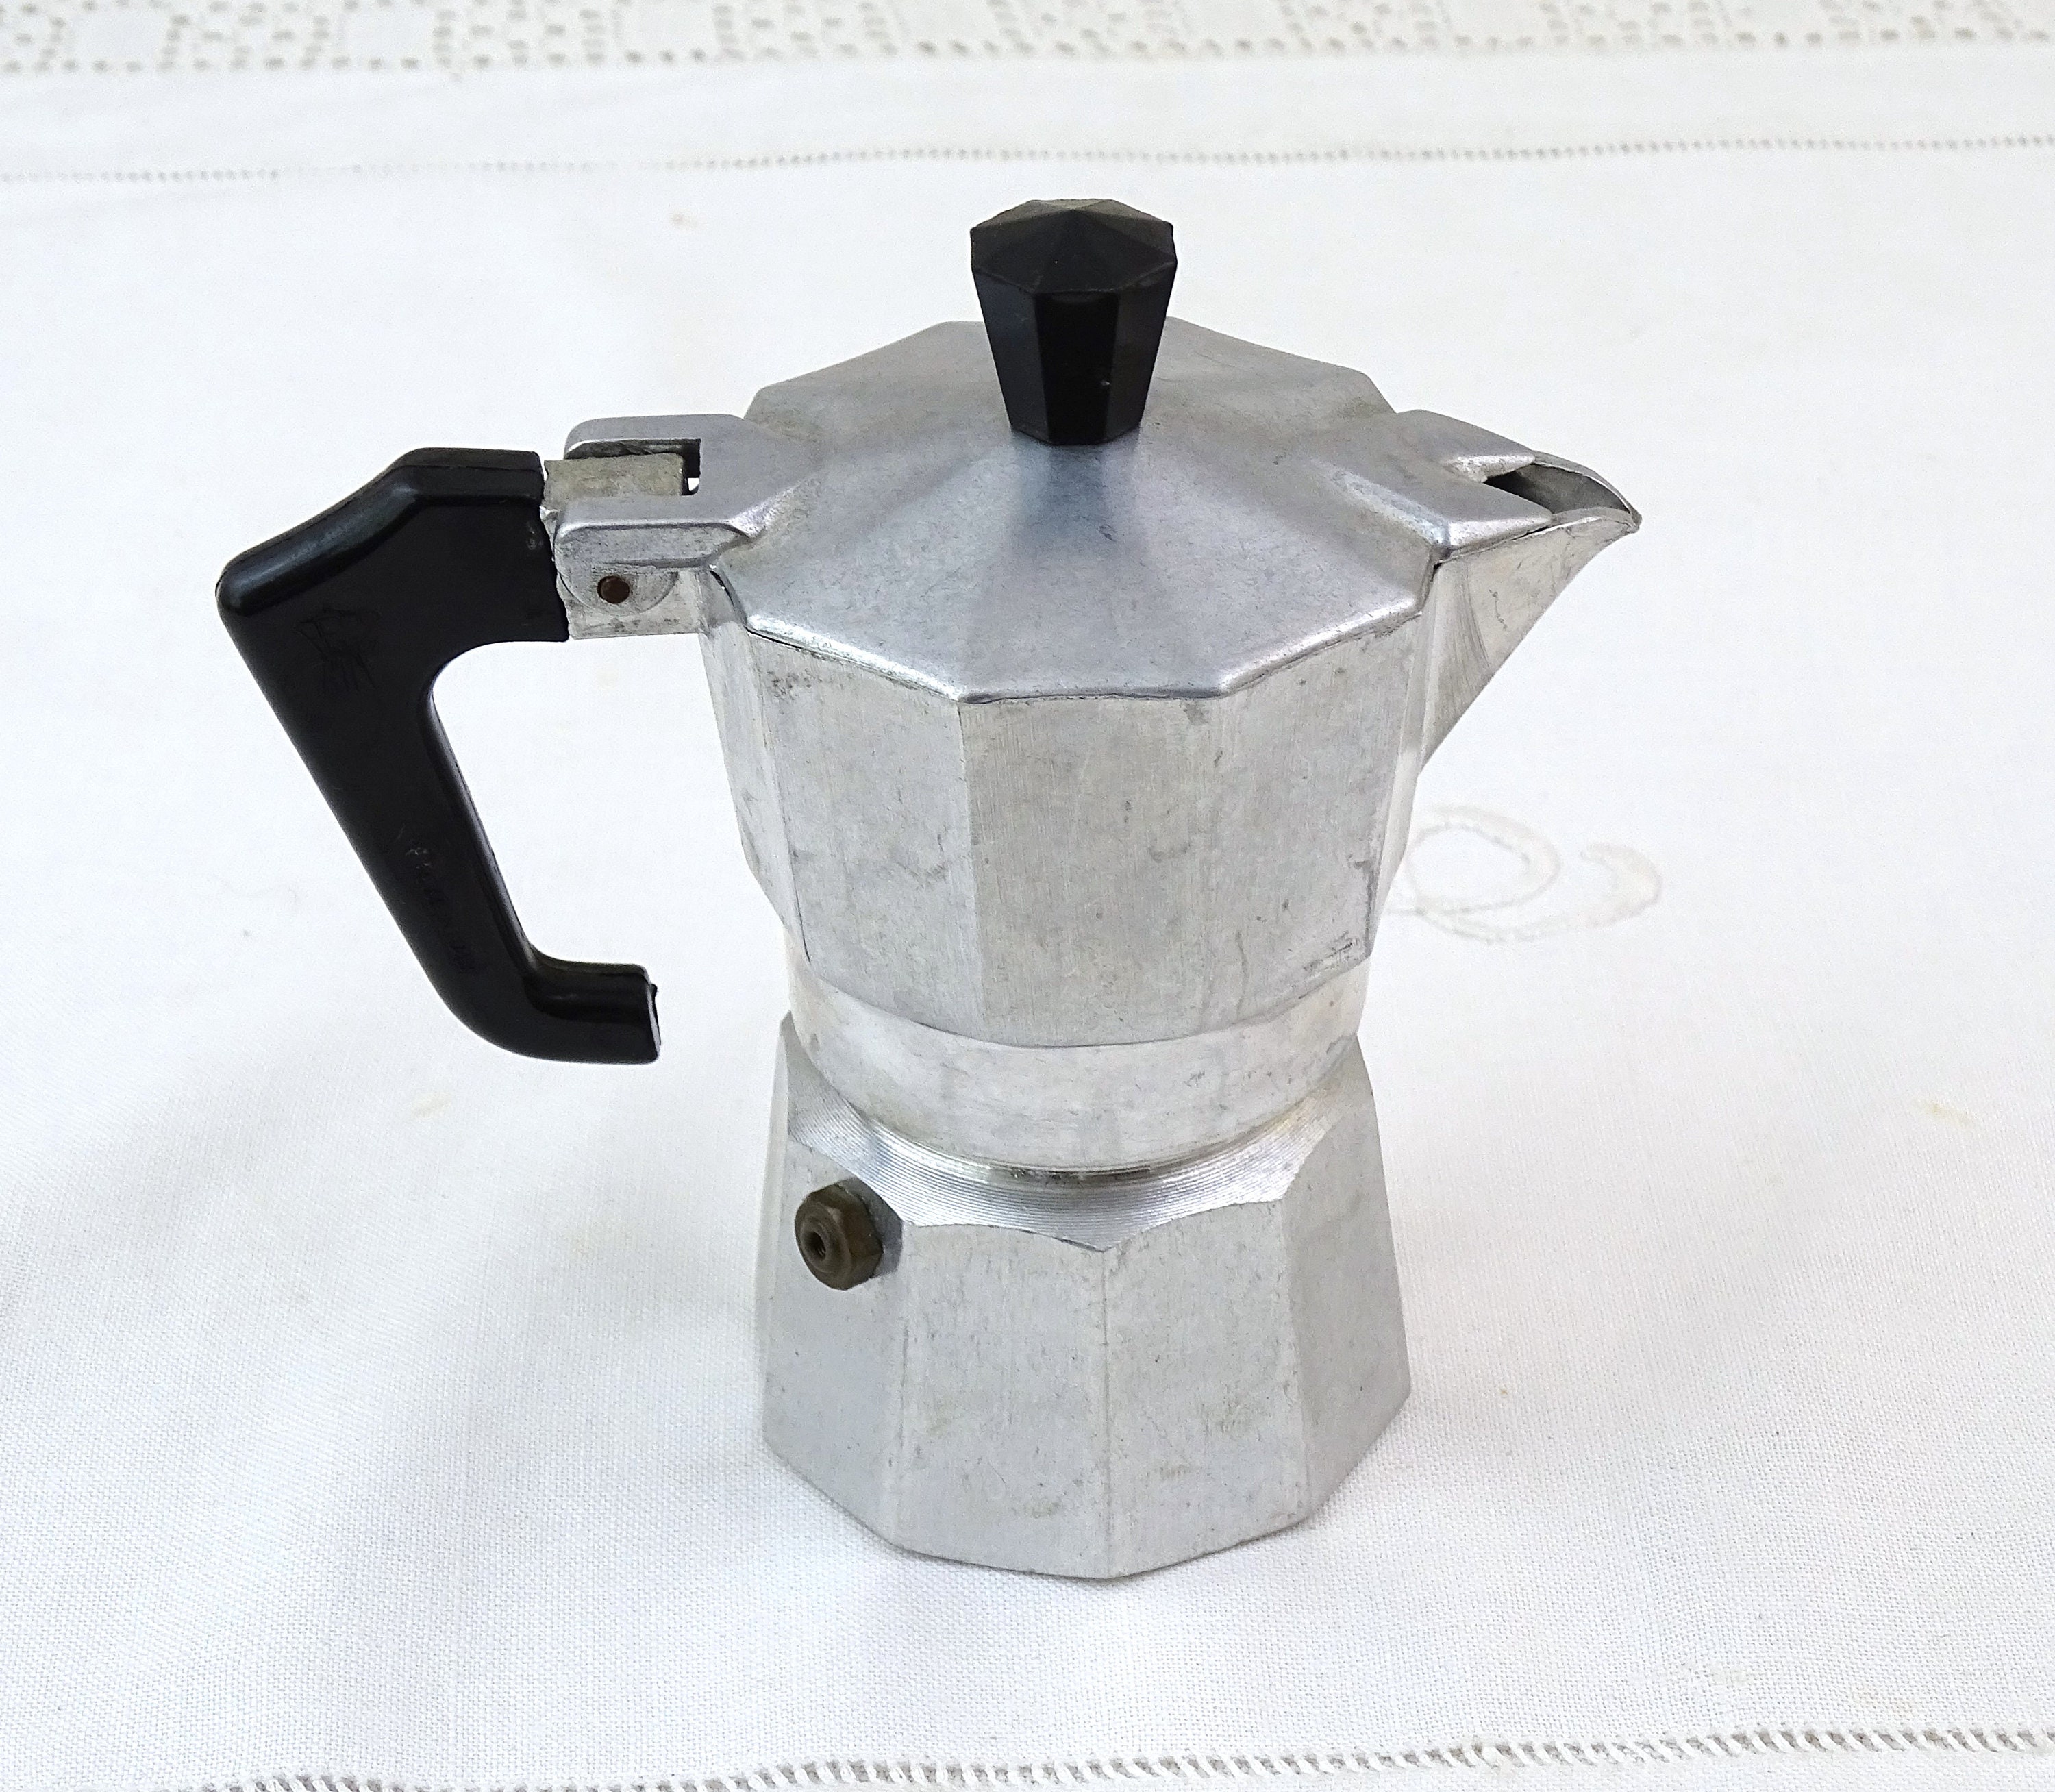 Vtg Italy Coffee Maker Pezz Etti Express Stovetop 1 Cup Camping Espresso